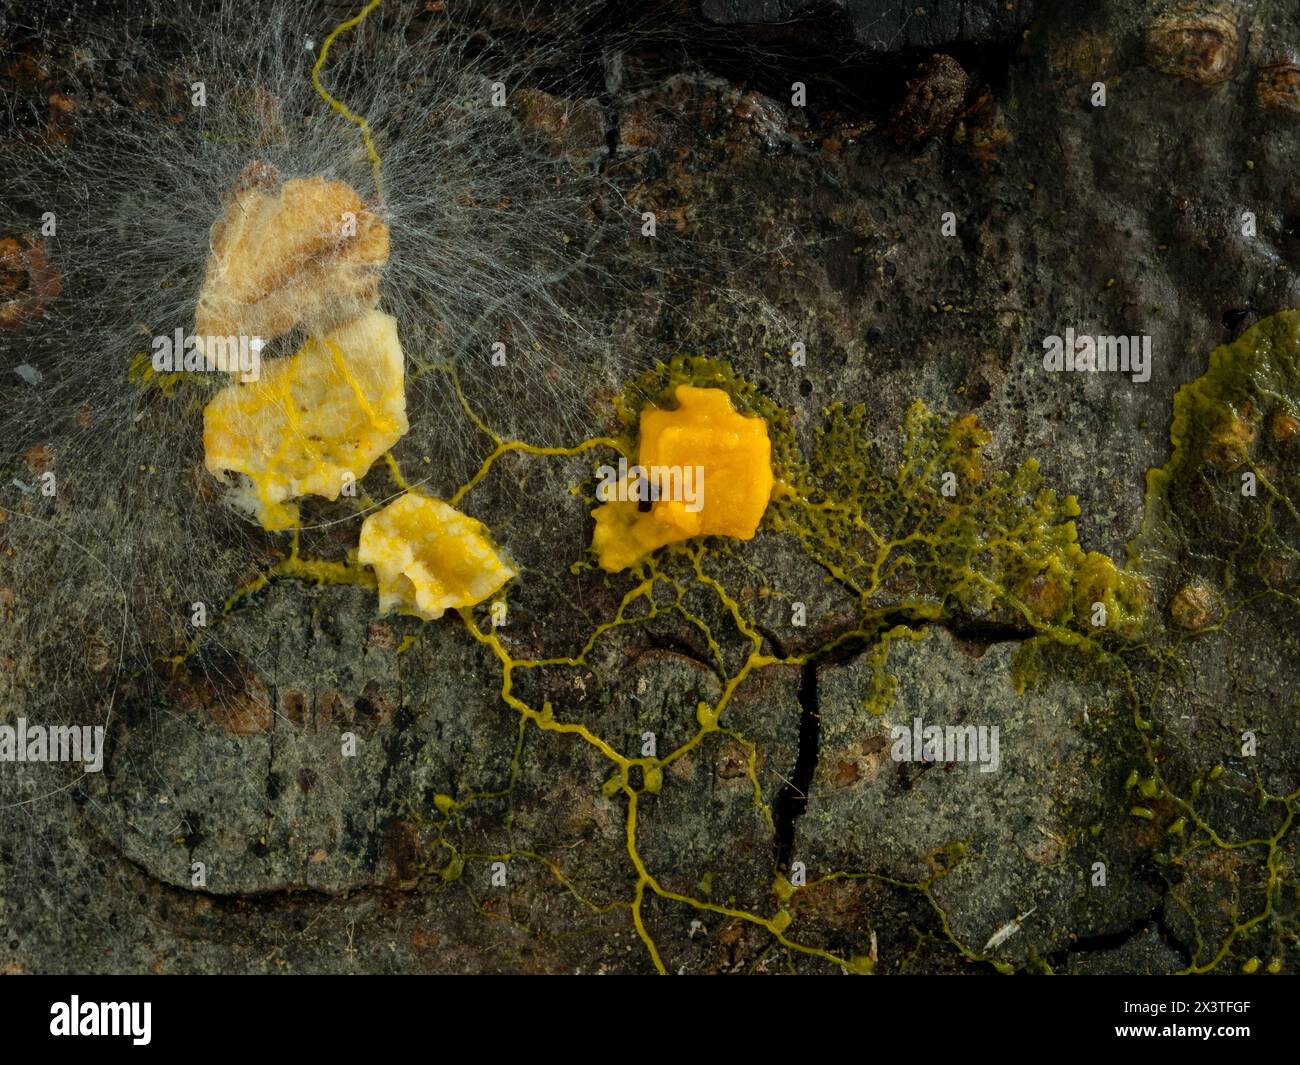 a slime mold plasmodium (Badhamia utricularis) on rotting wood, engulfing and consuming rolled oats that are also growing a white fungus Stock Photo